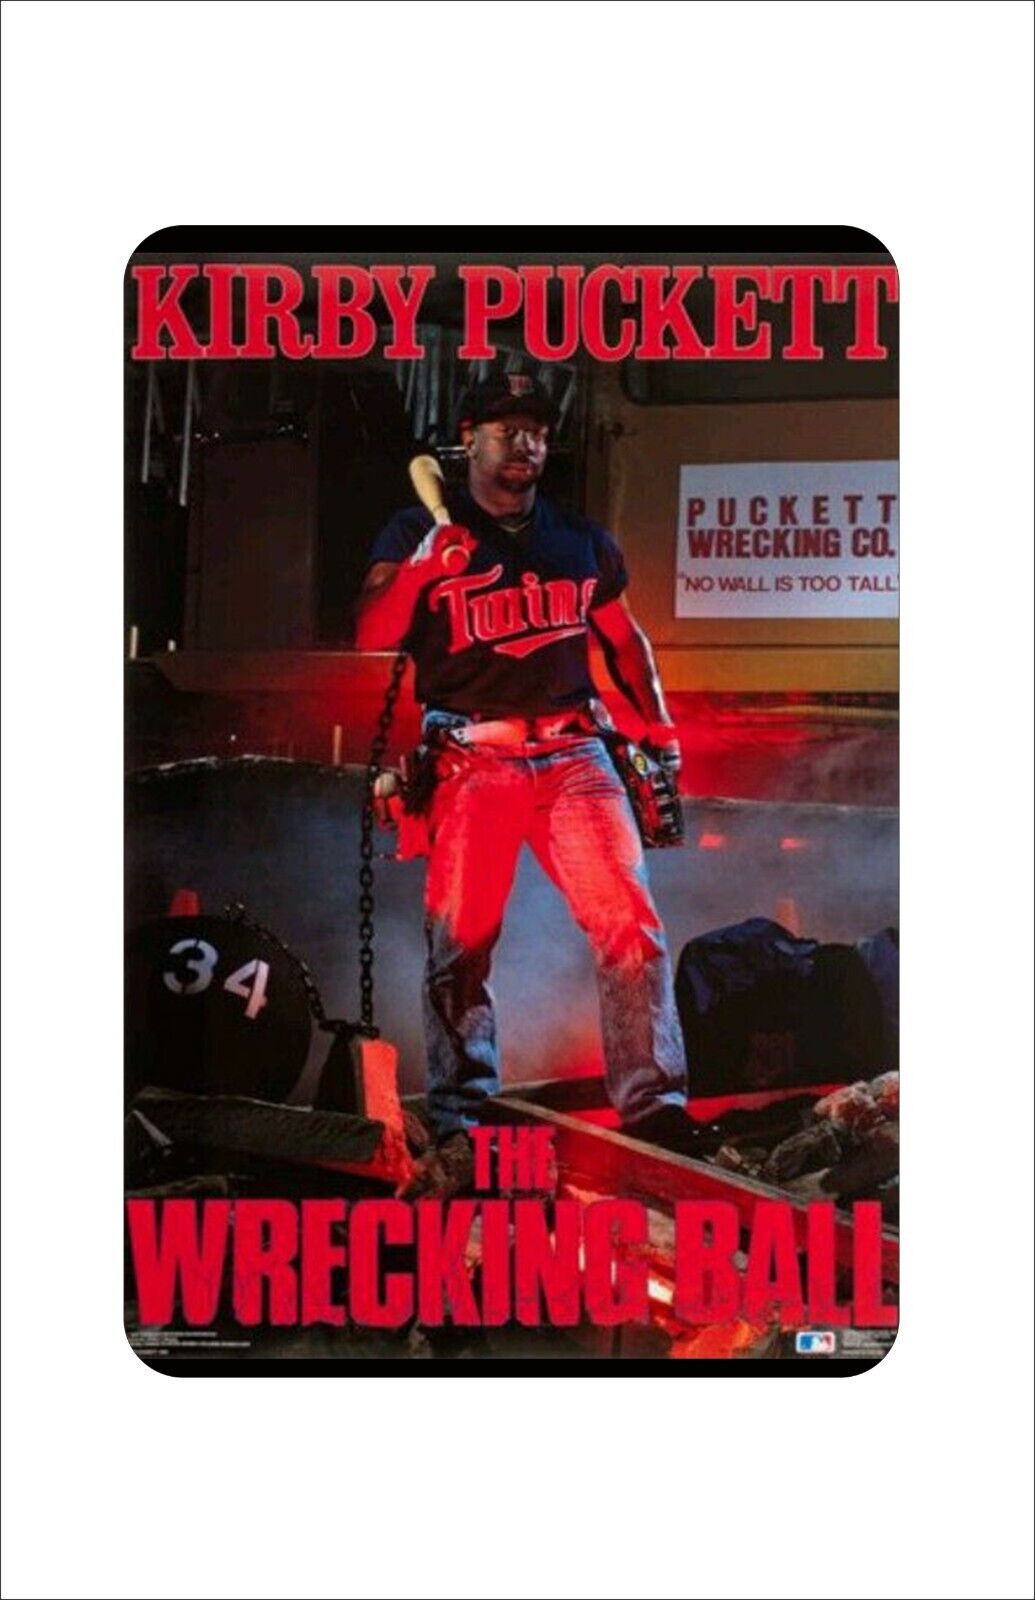 KIRBY PUCKETT WRECKING BALL Vintage Reproduction metal sign